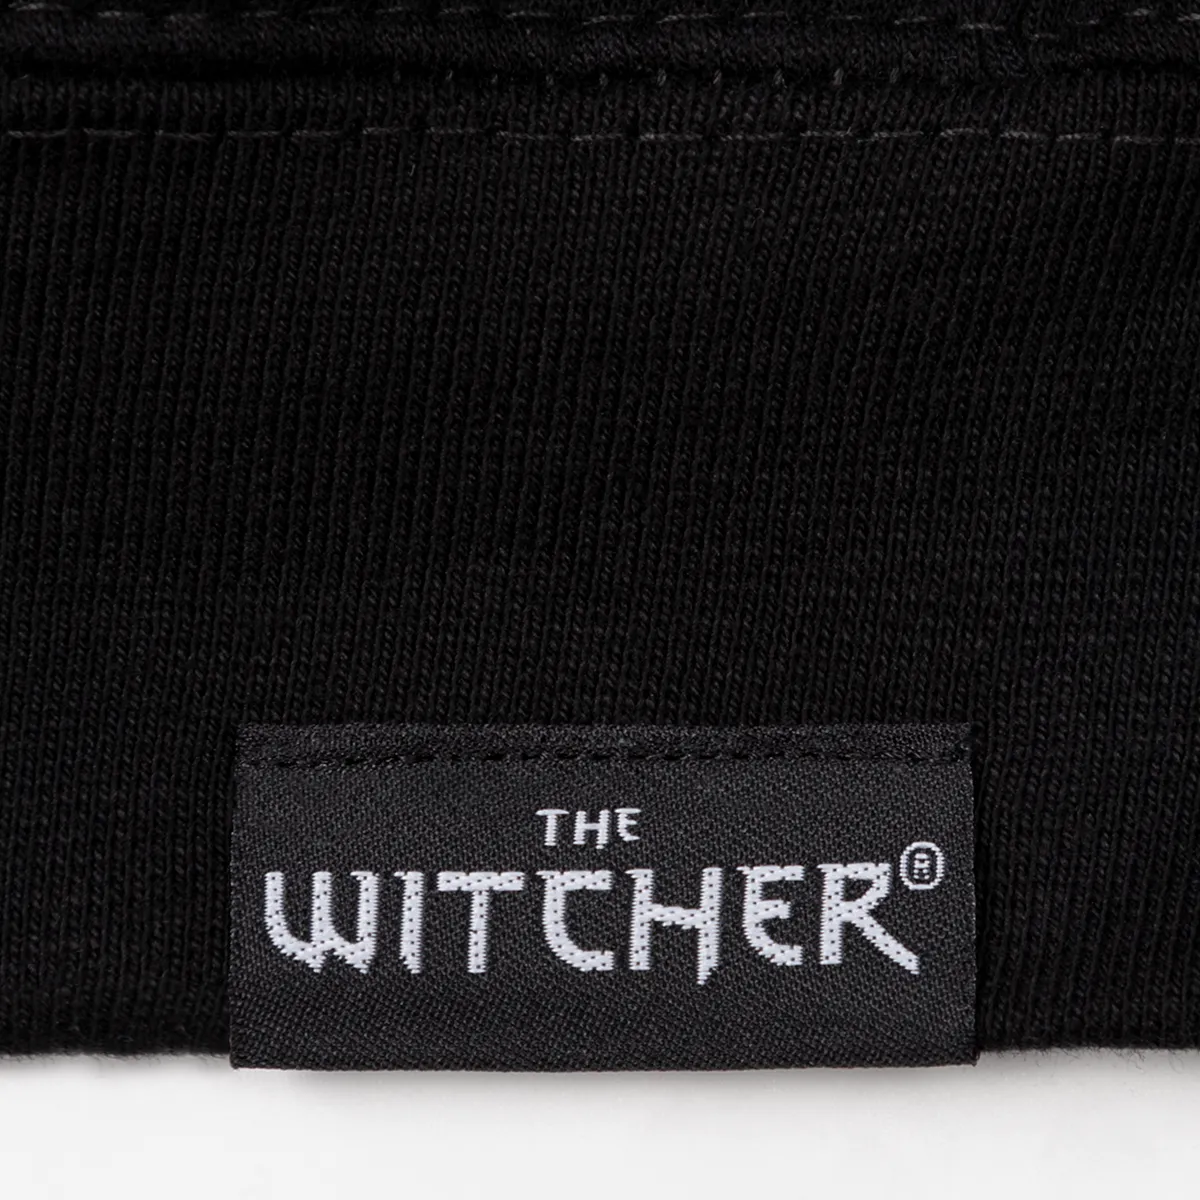 The Witcher Hoodie "Yennefer Dalí" Image 5